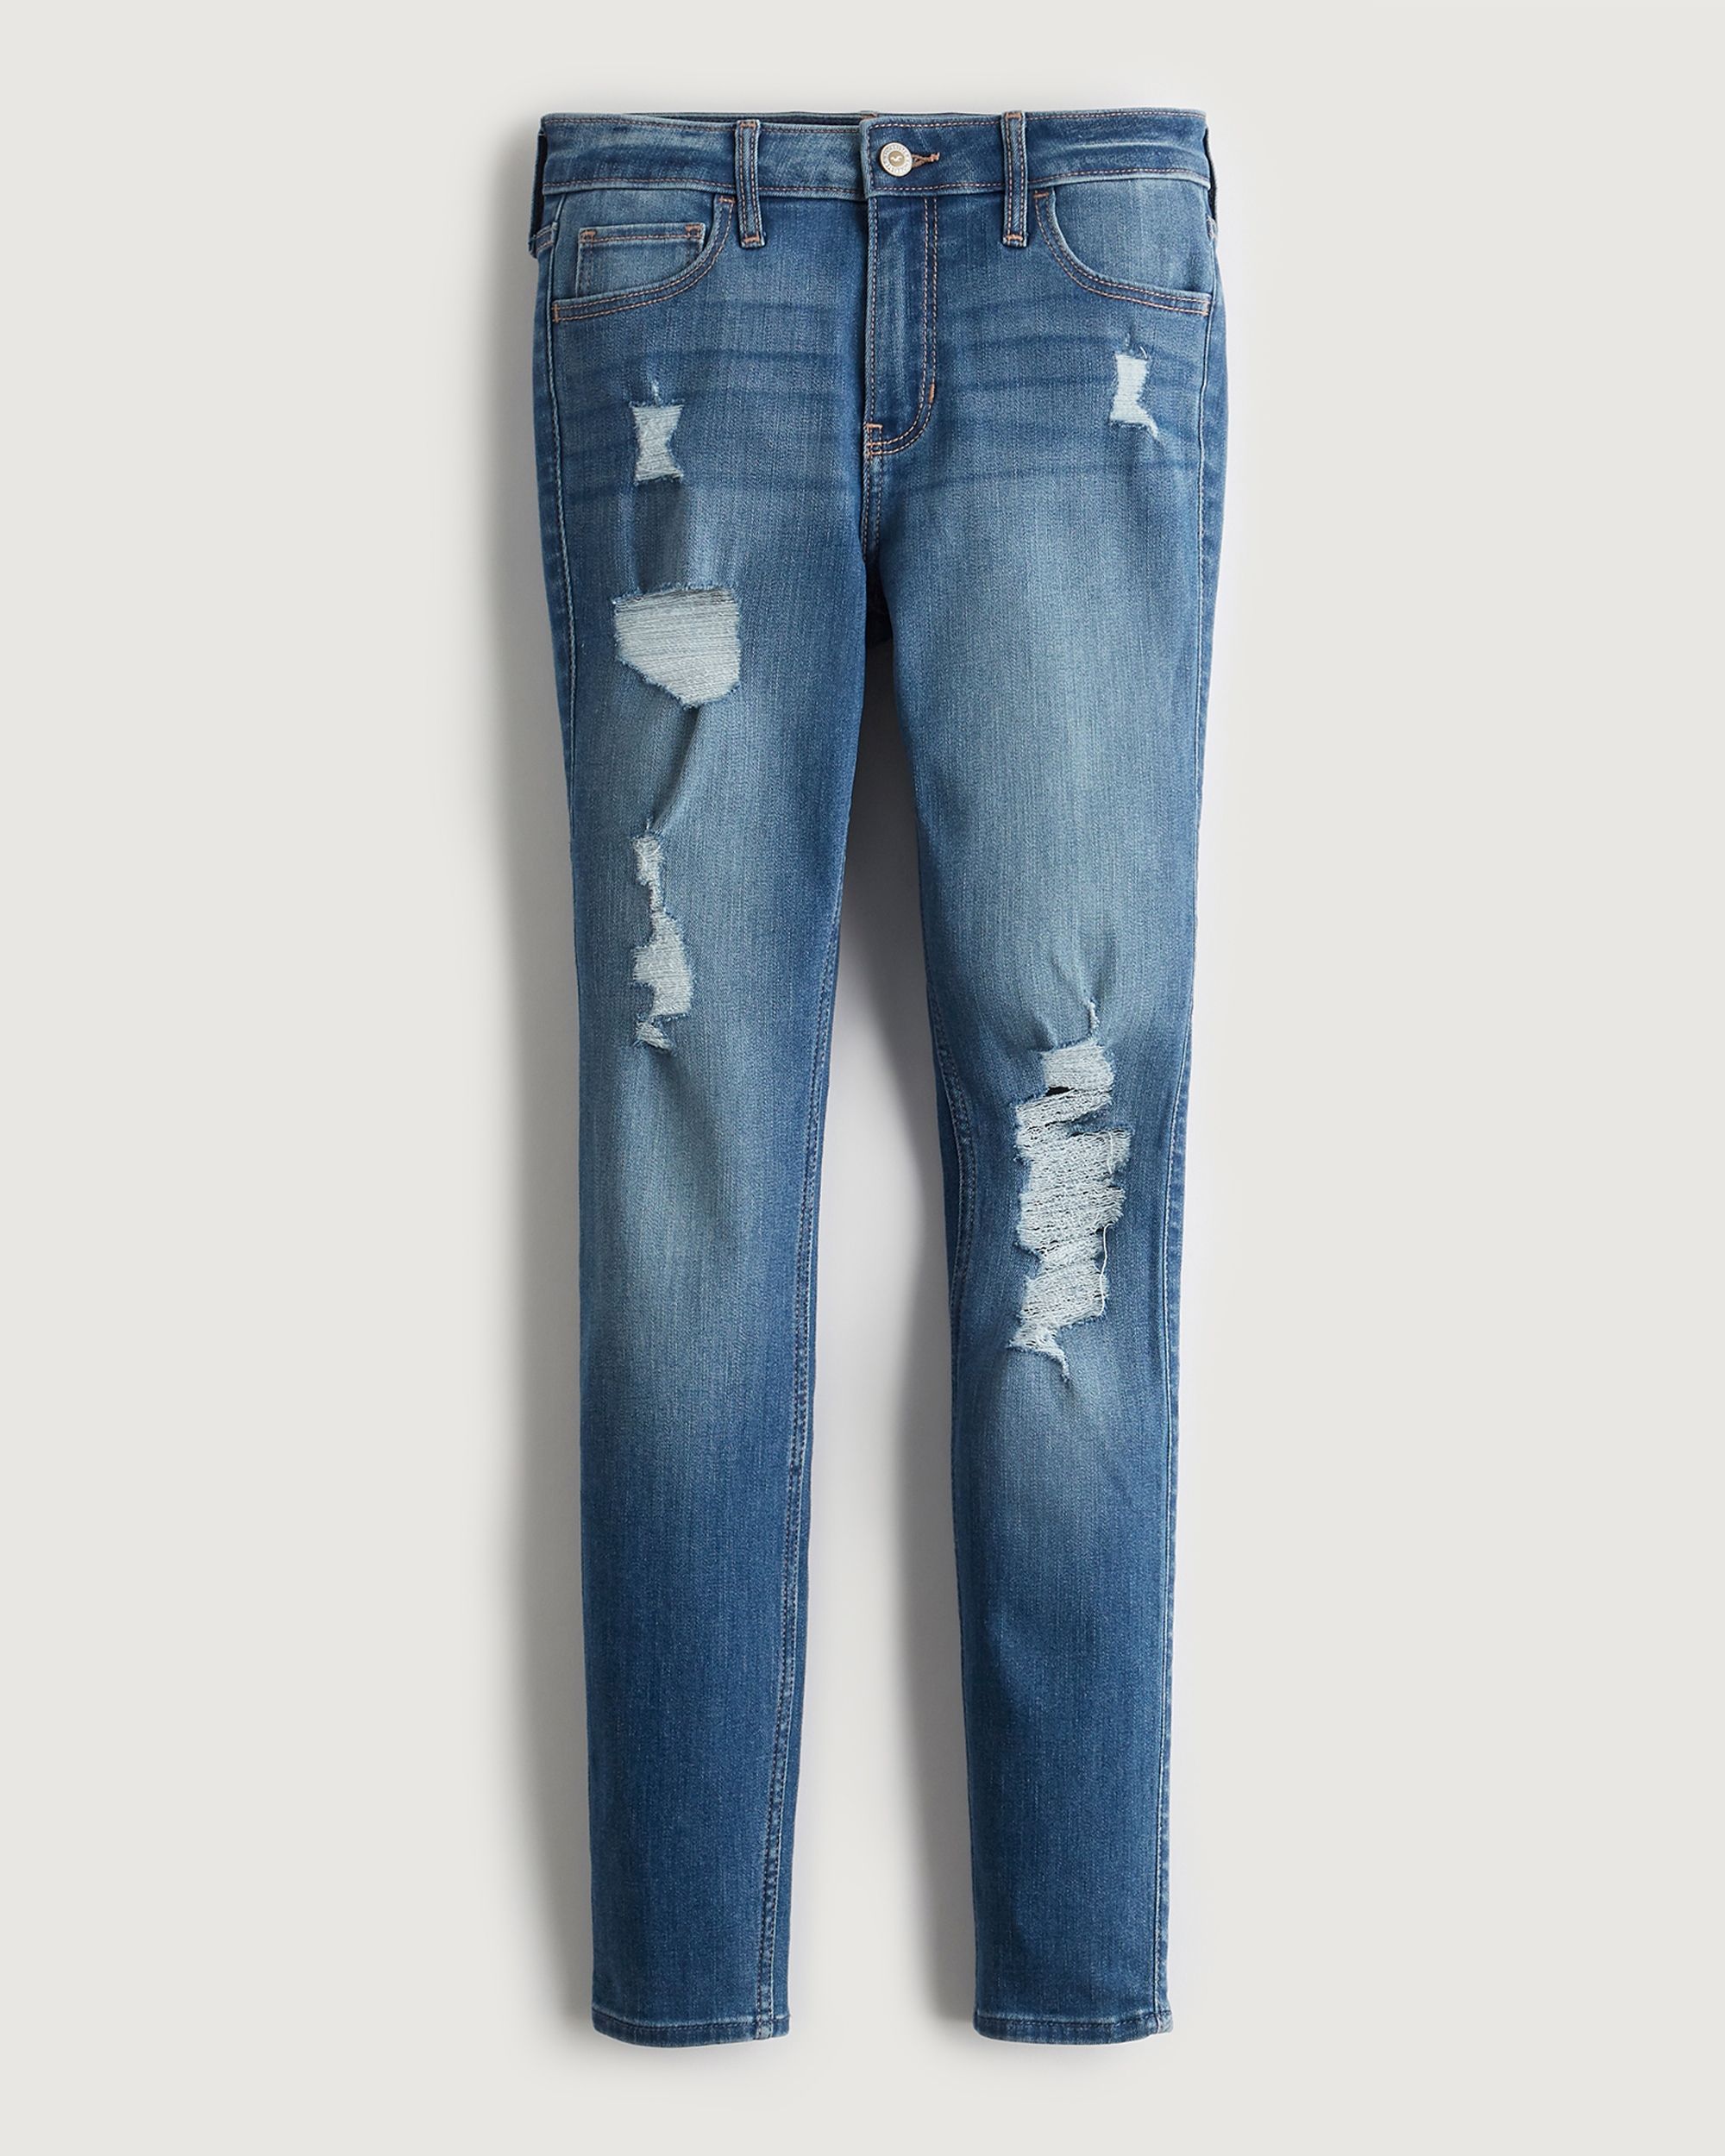 Girls Ripped Jeans | Hollister Co.